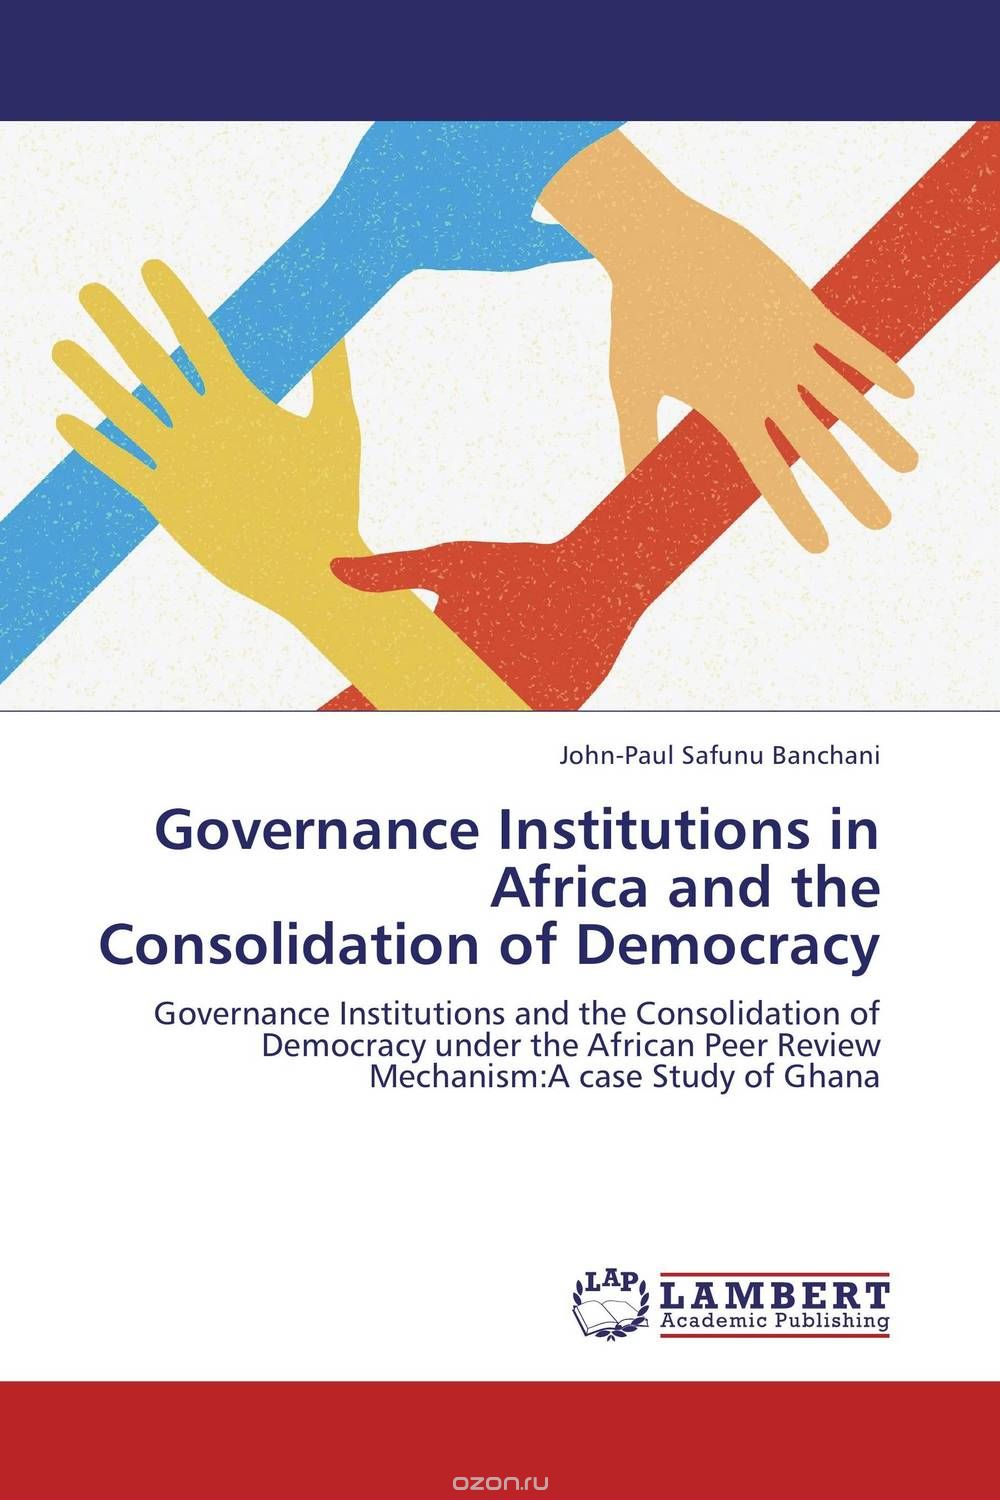 Governance Institutions in Africa and the Consolidation of Democracy